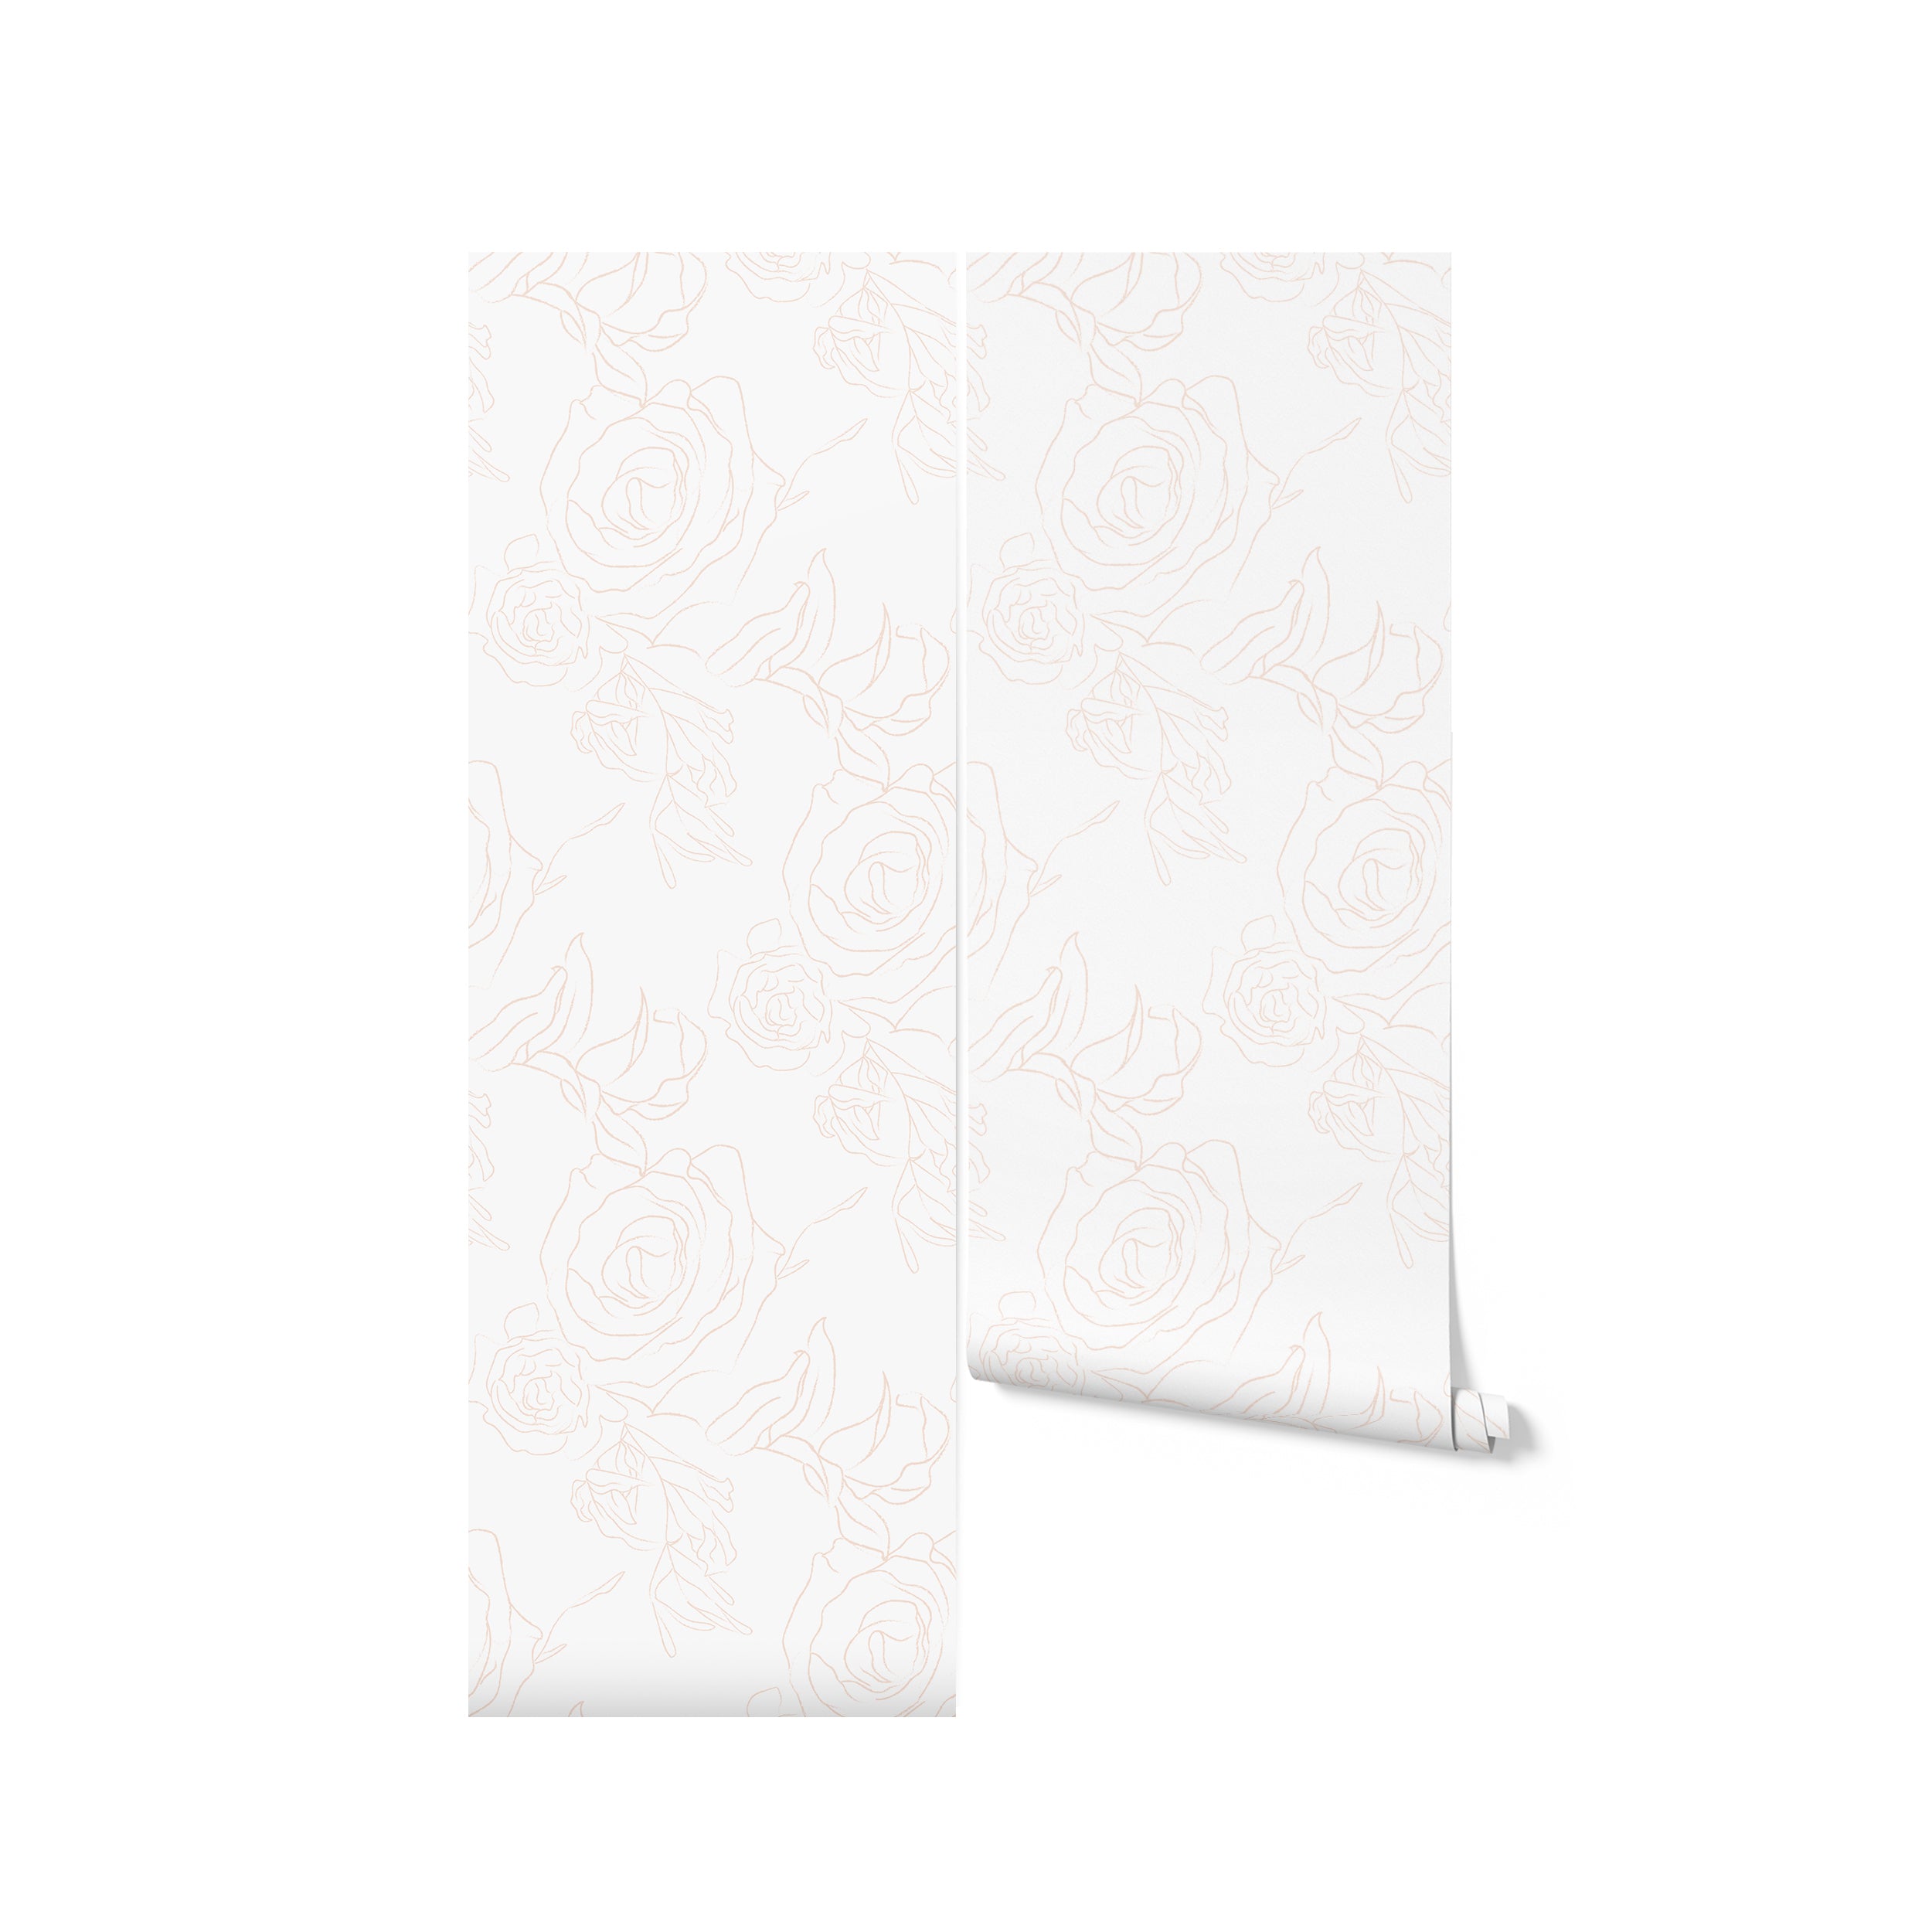 A roll of Minimal Floral Line Wallpaper displayed against a white backdrop, featuring a seamless pattern of rose sketches with thin copper lines, combining the beauty of nature with a clean, minimalist design suitable for a variety of modern interior spaces.